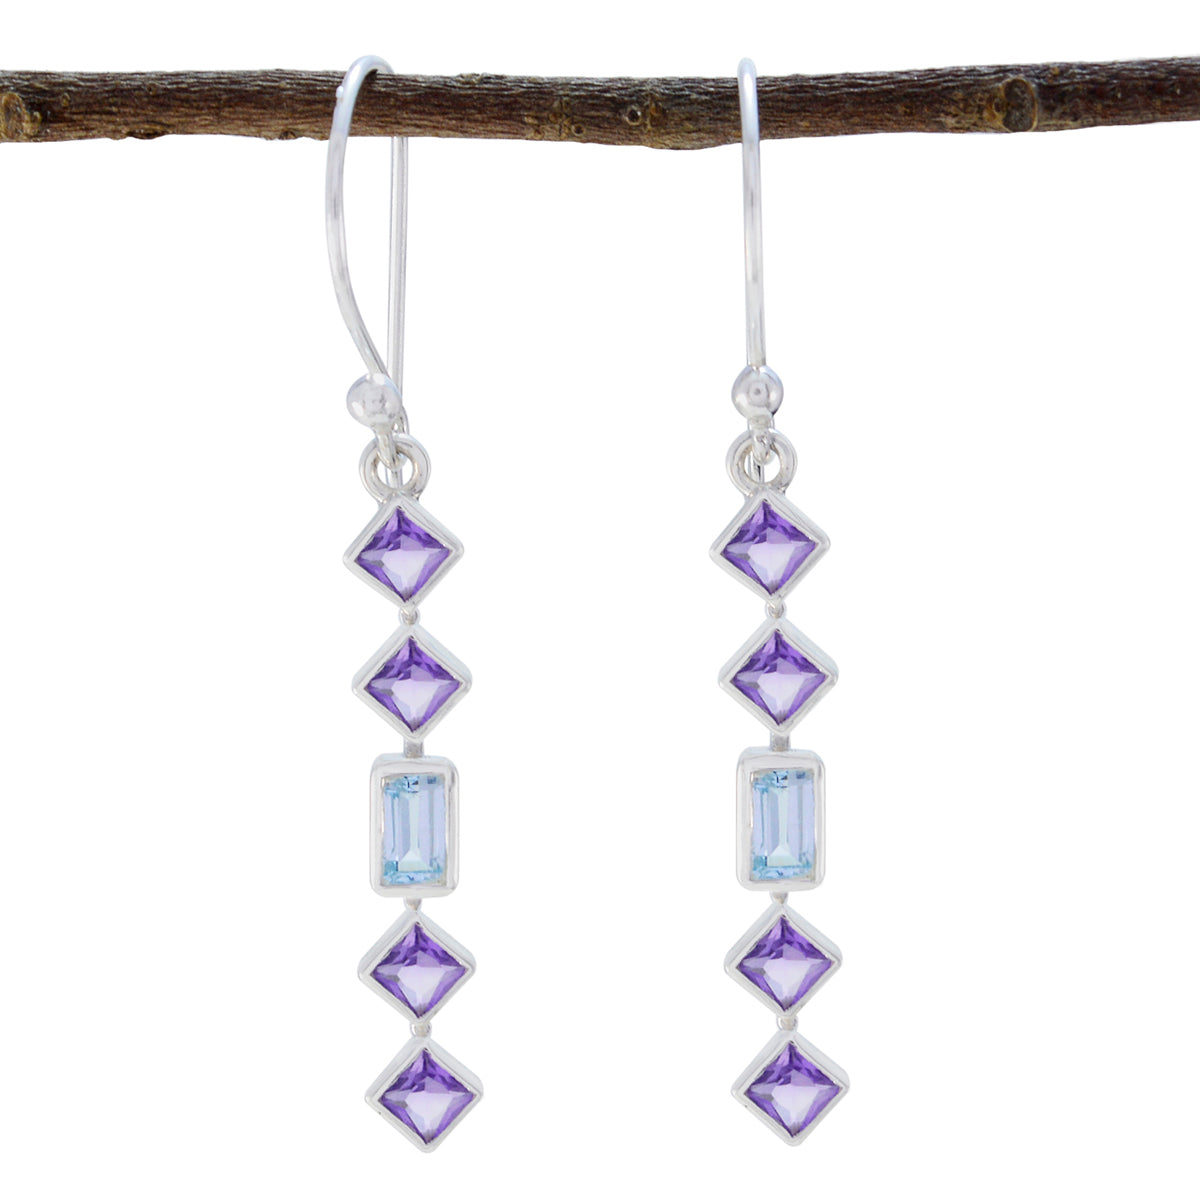 Riyo Natural Gemstone multi shape Faceted Multi Multi Stone Silver Earrings gift for labour day